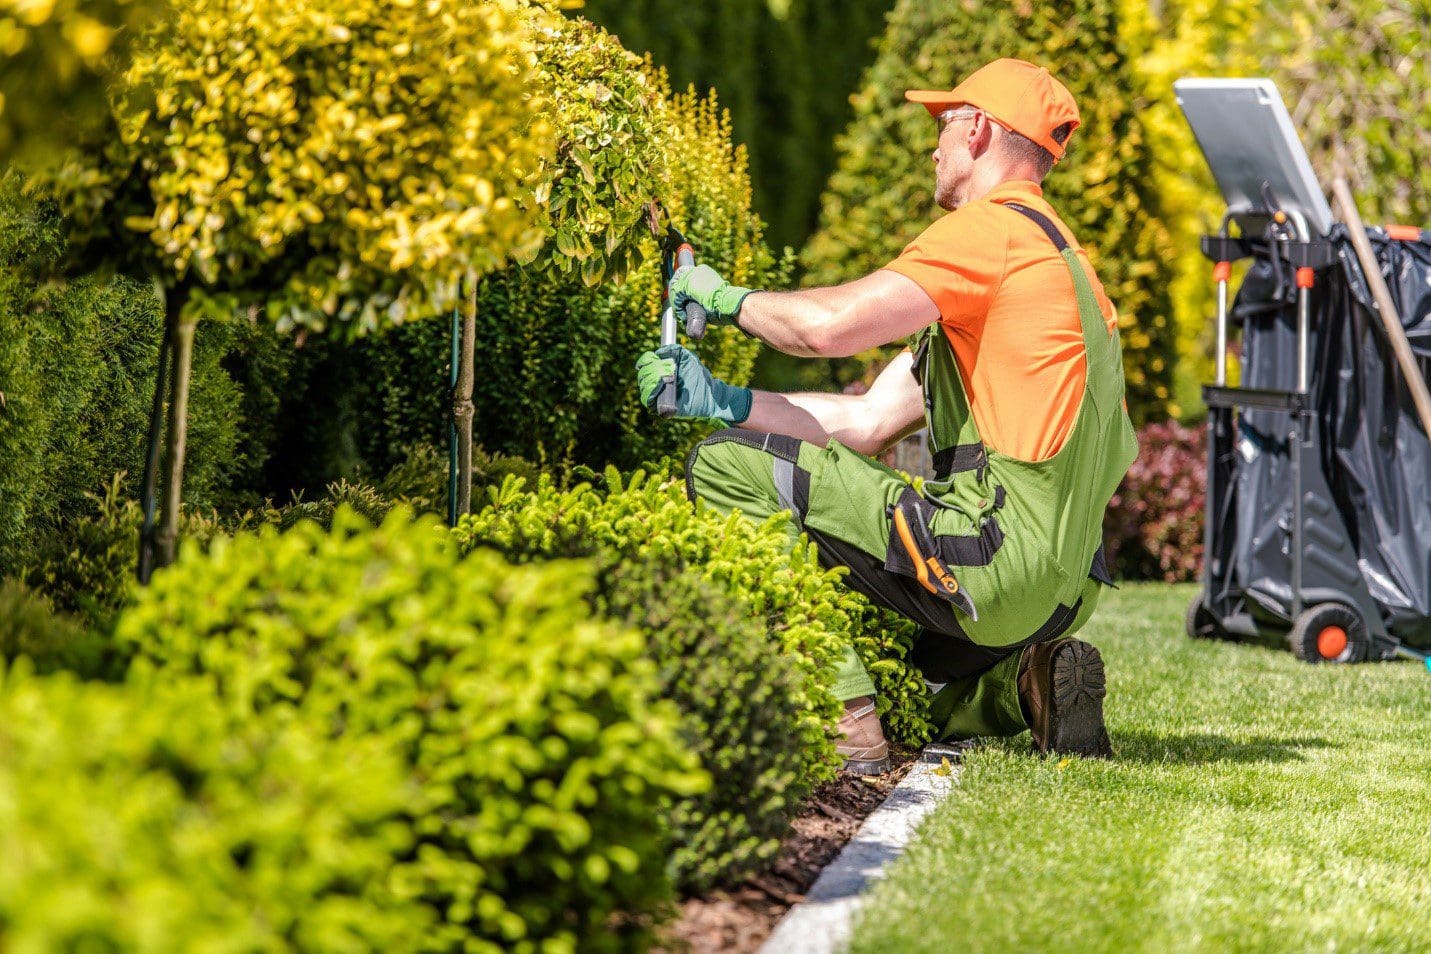 Landscaping company working